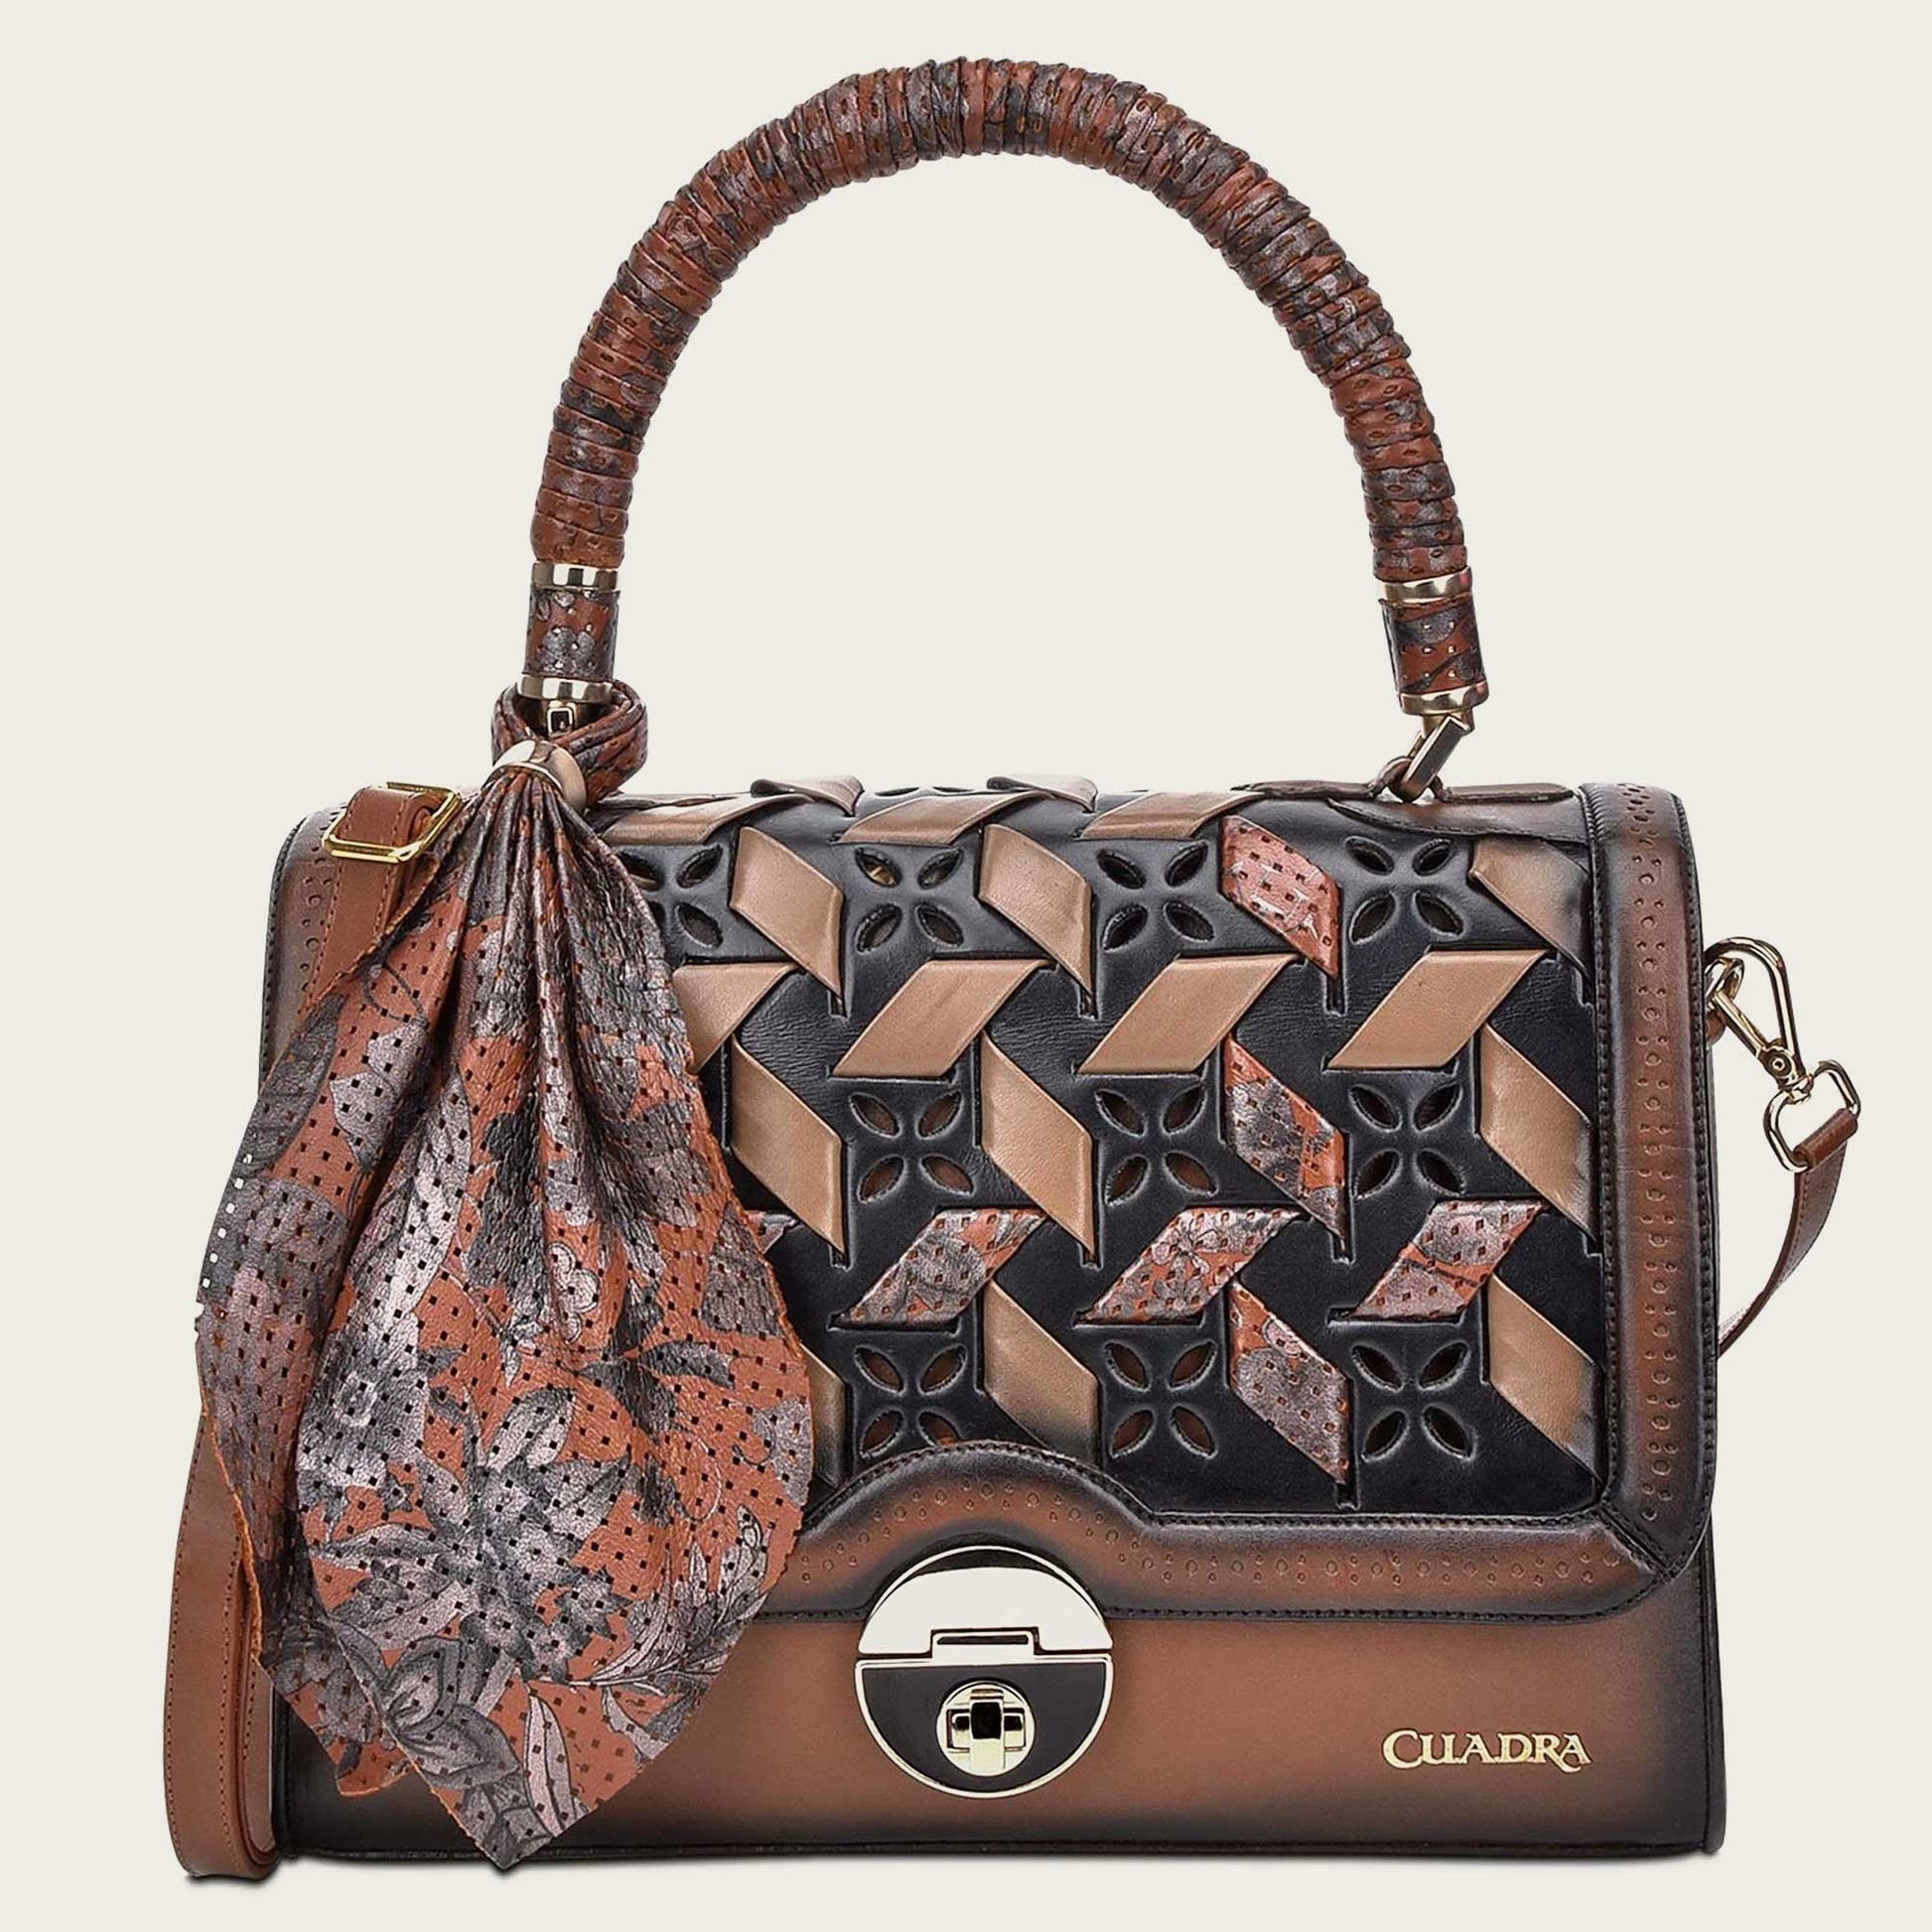 The front flap boasts a stunning perforated design with intricate organic motifs, carefully woven using bovine leather. 